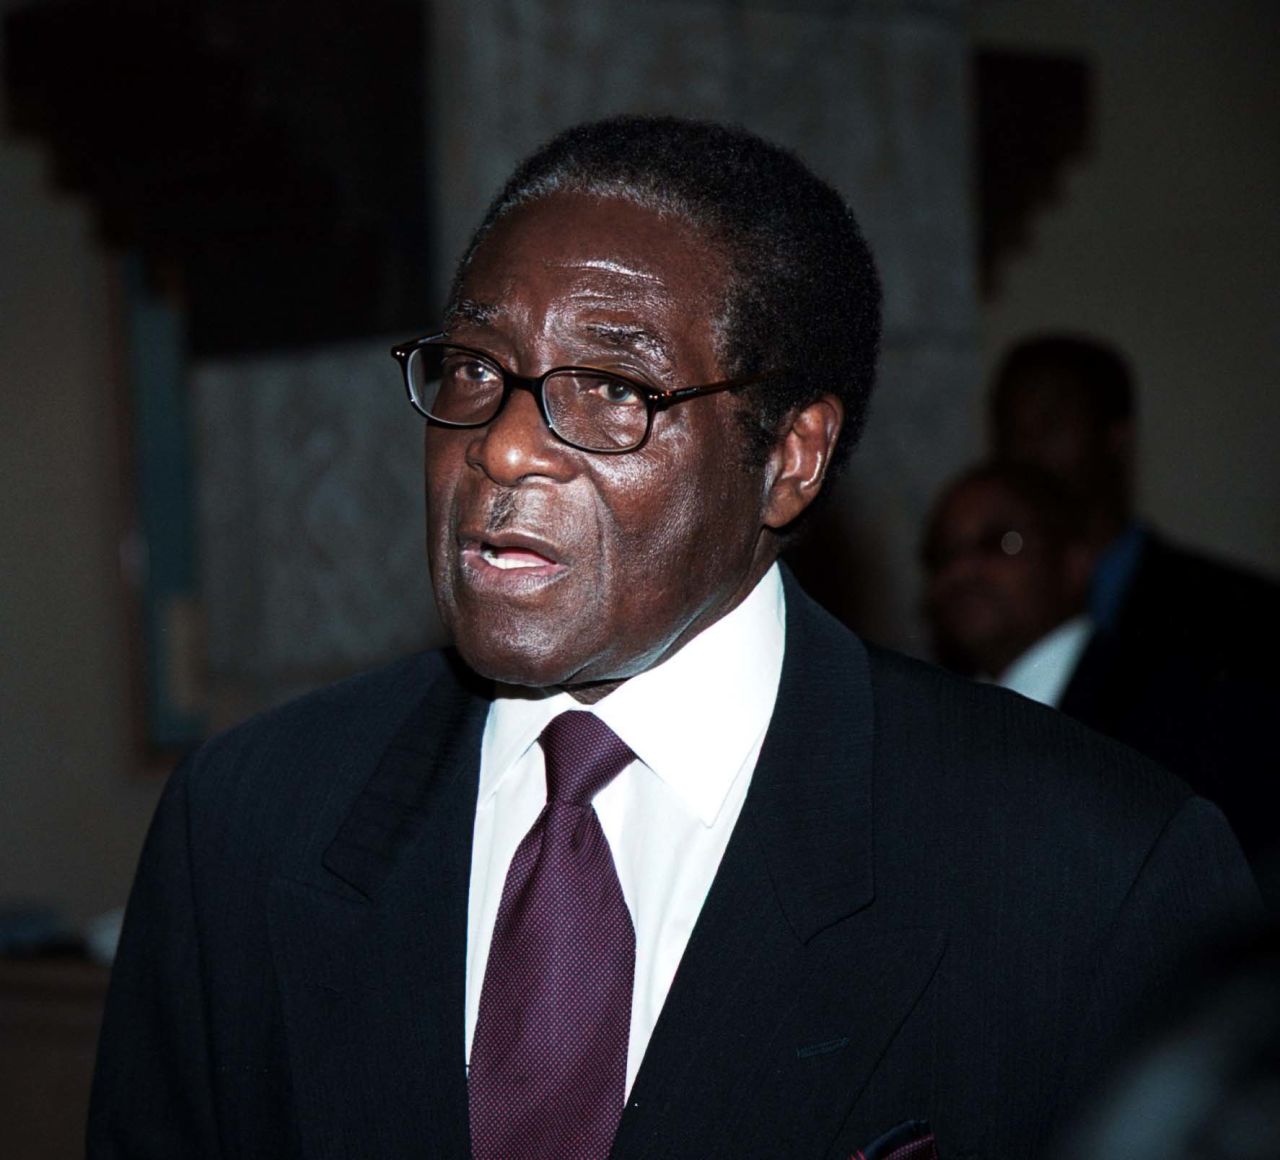 Mugabe speaks during the Southern Africa trade and investment summit in Windhoek, Namibia, in October 2000. Earlier in the year, he implemented a controversial land-reform program that saw the seizure of land from some 4,000 white farmers.